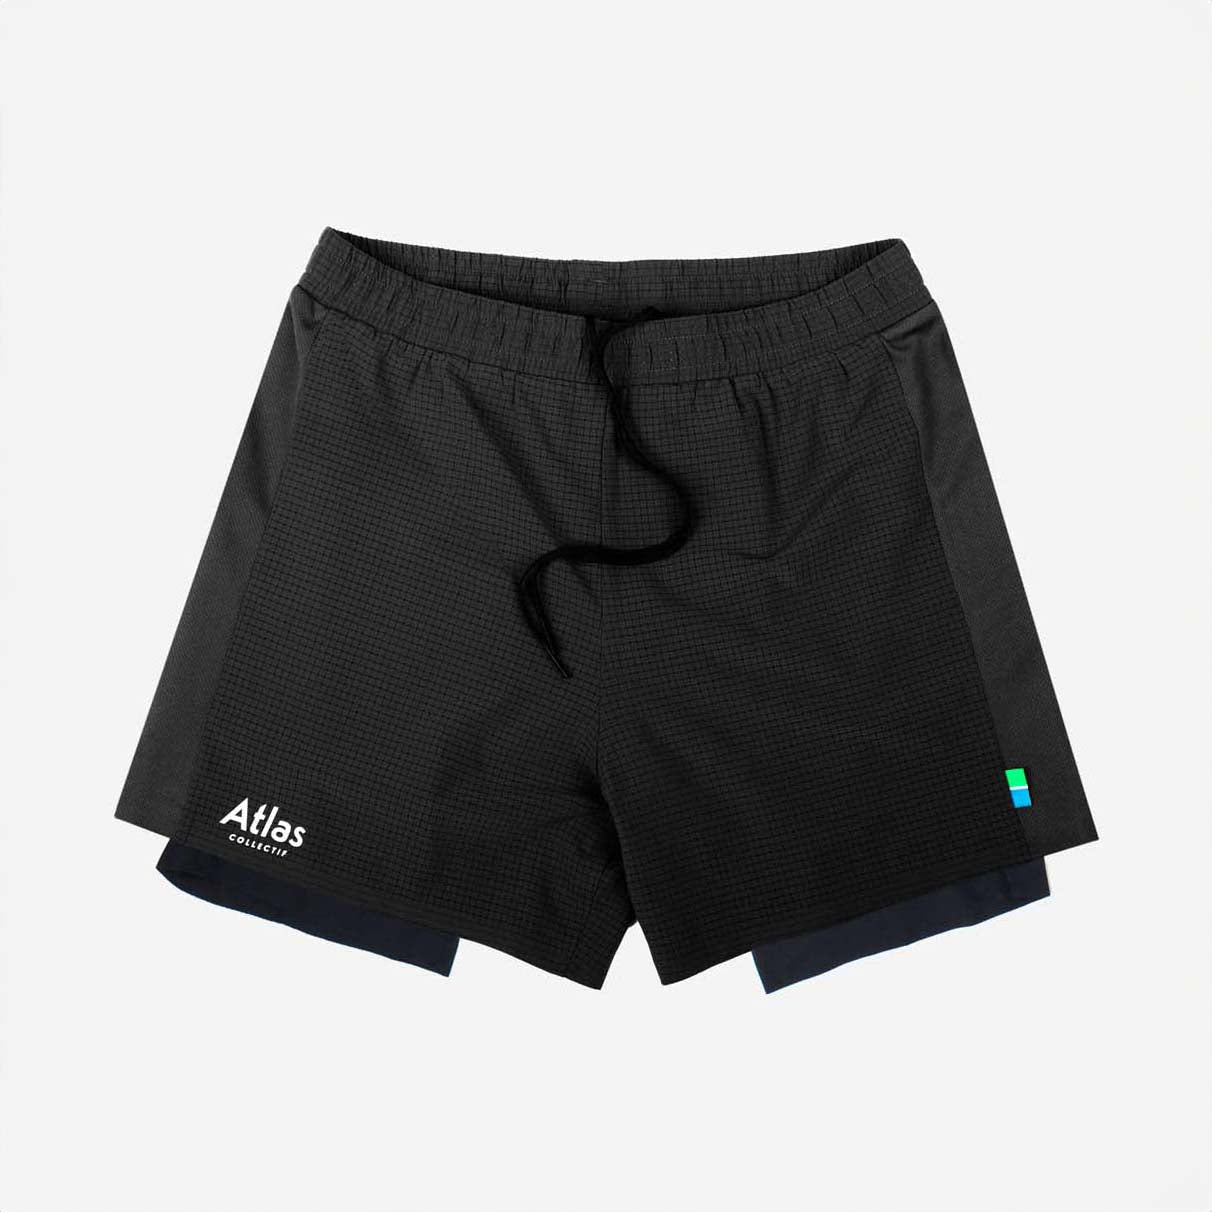 Black Double-layer recycled-fibre blend running shorts